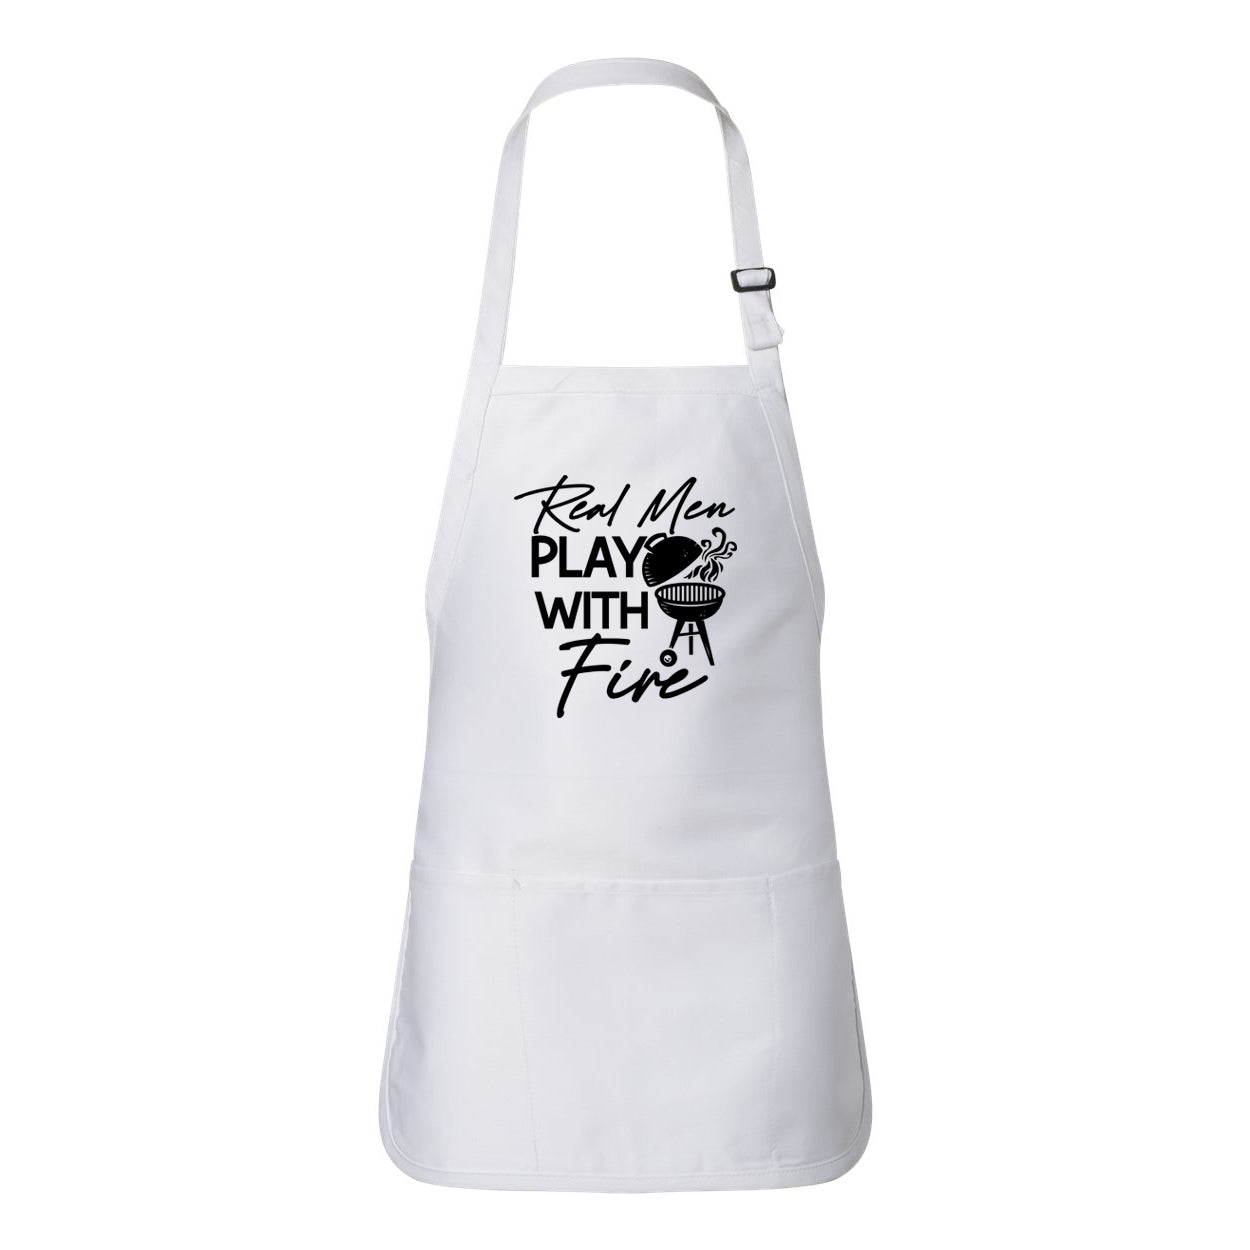 Real Men Play With Fire | Apron